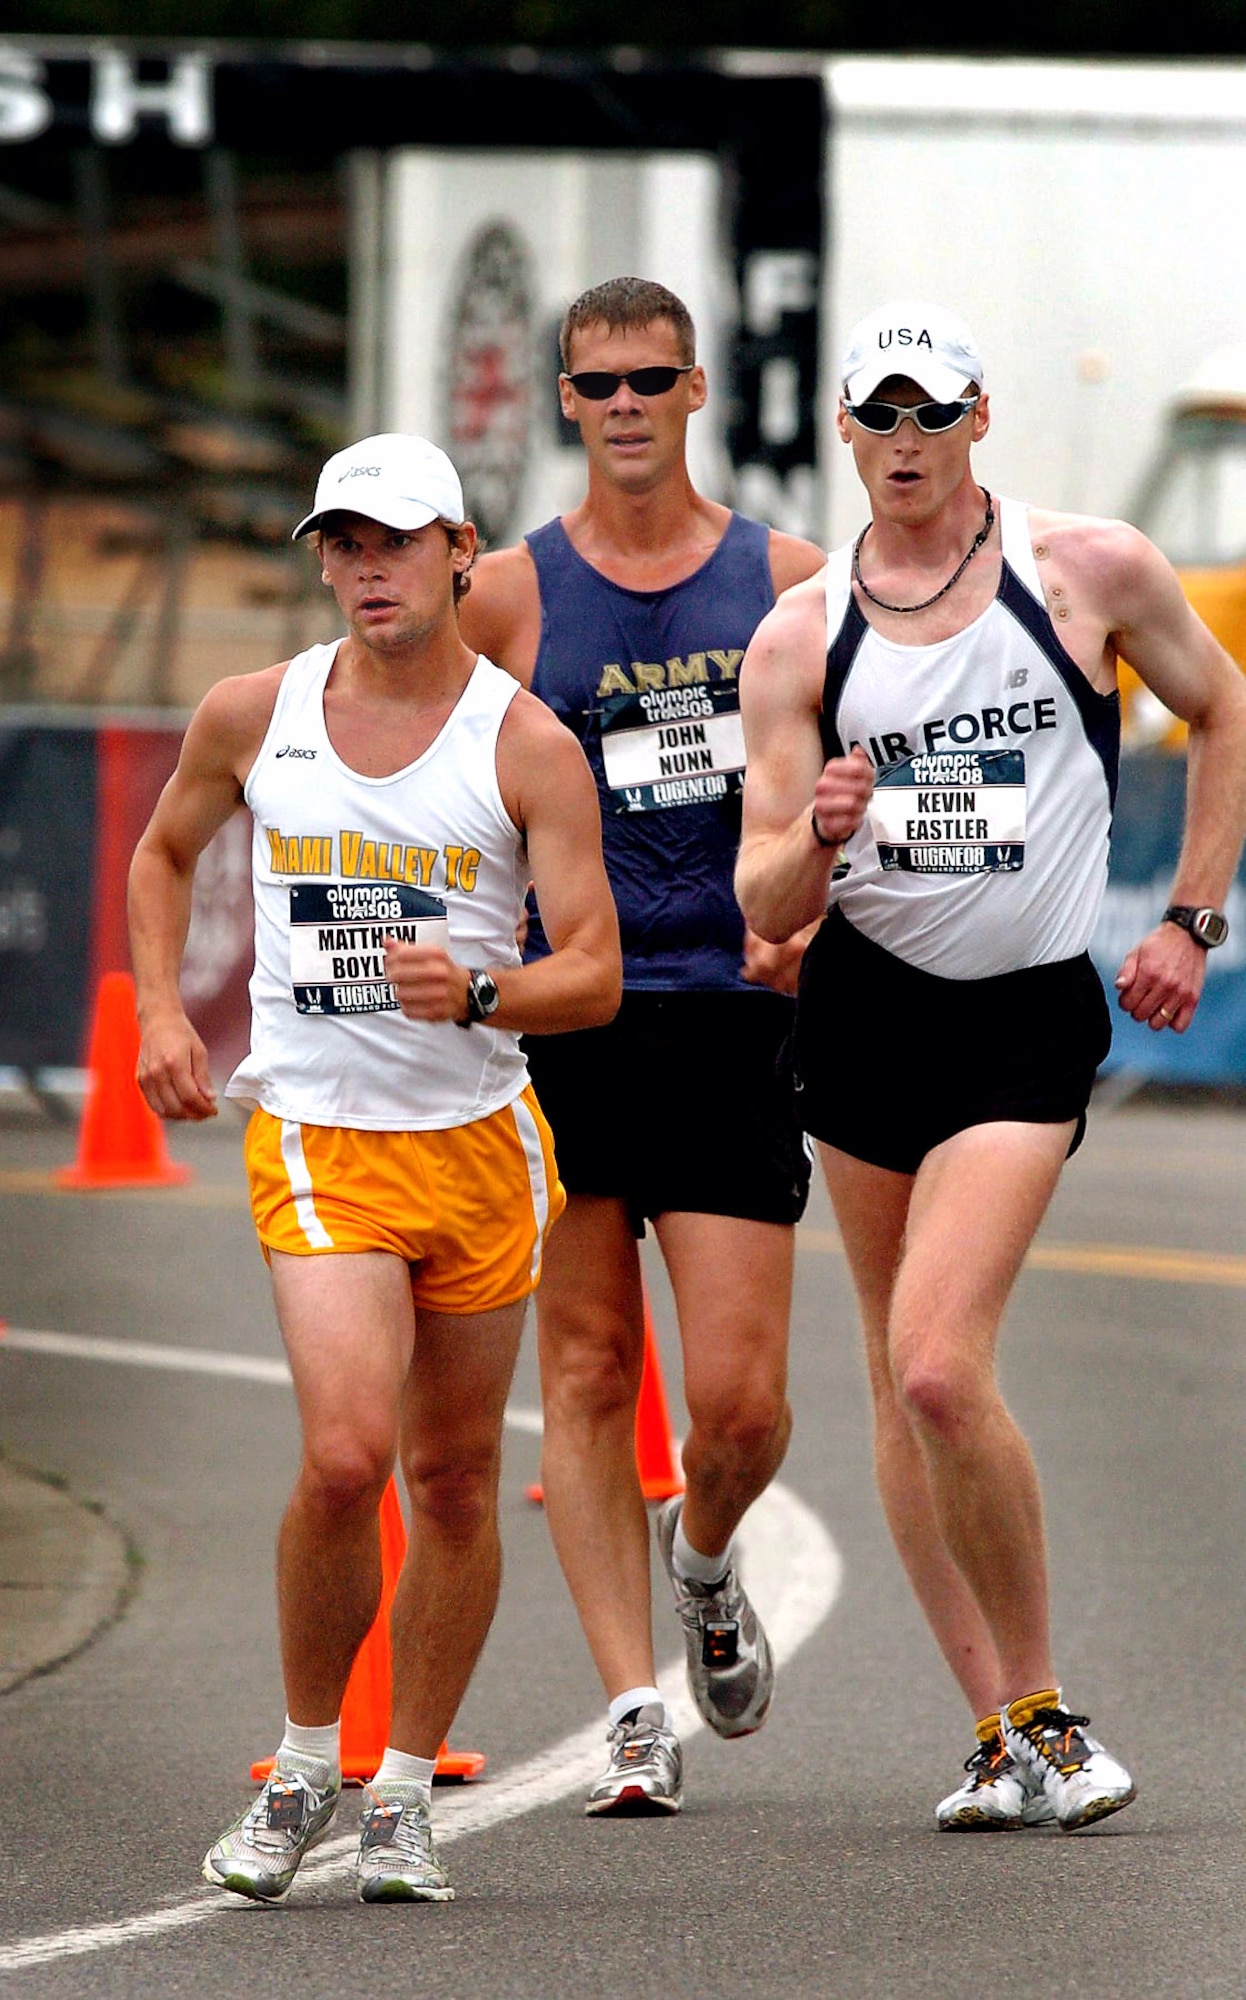 Air Force World Class Athlete Program Capt. Kevin Eastler (right) passes Army WCAP Sgt. John Nunn (center) en route to winning the 20-kilometer race walk at the 2008 U.S. Olympic Team Trials for Track & Field July 5 outside Autzen Stadium in Eugene, Ore. Eastler won the race in 1 hour, 27 minutes, 8 seconds, and was followed by runner-up Matthew Boyles (left) of Miami Valley Track Club in 1:28:20. Nunn finished fourth with a time of 1:30:35. Eastler will compete for Team USA at the Olympic Games in Beijing. (U.S. Air Force photo/Tim Hipps)